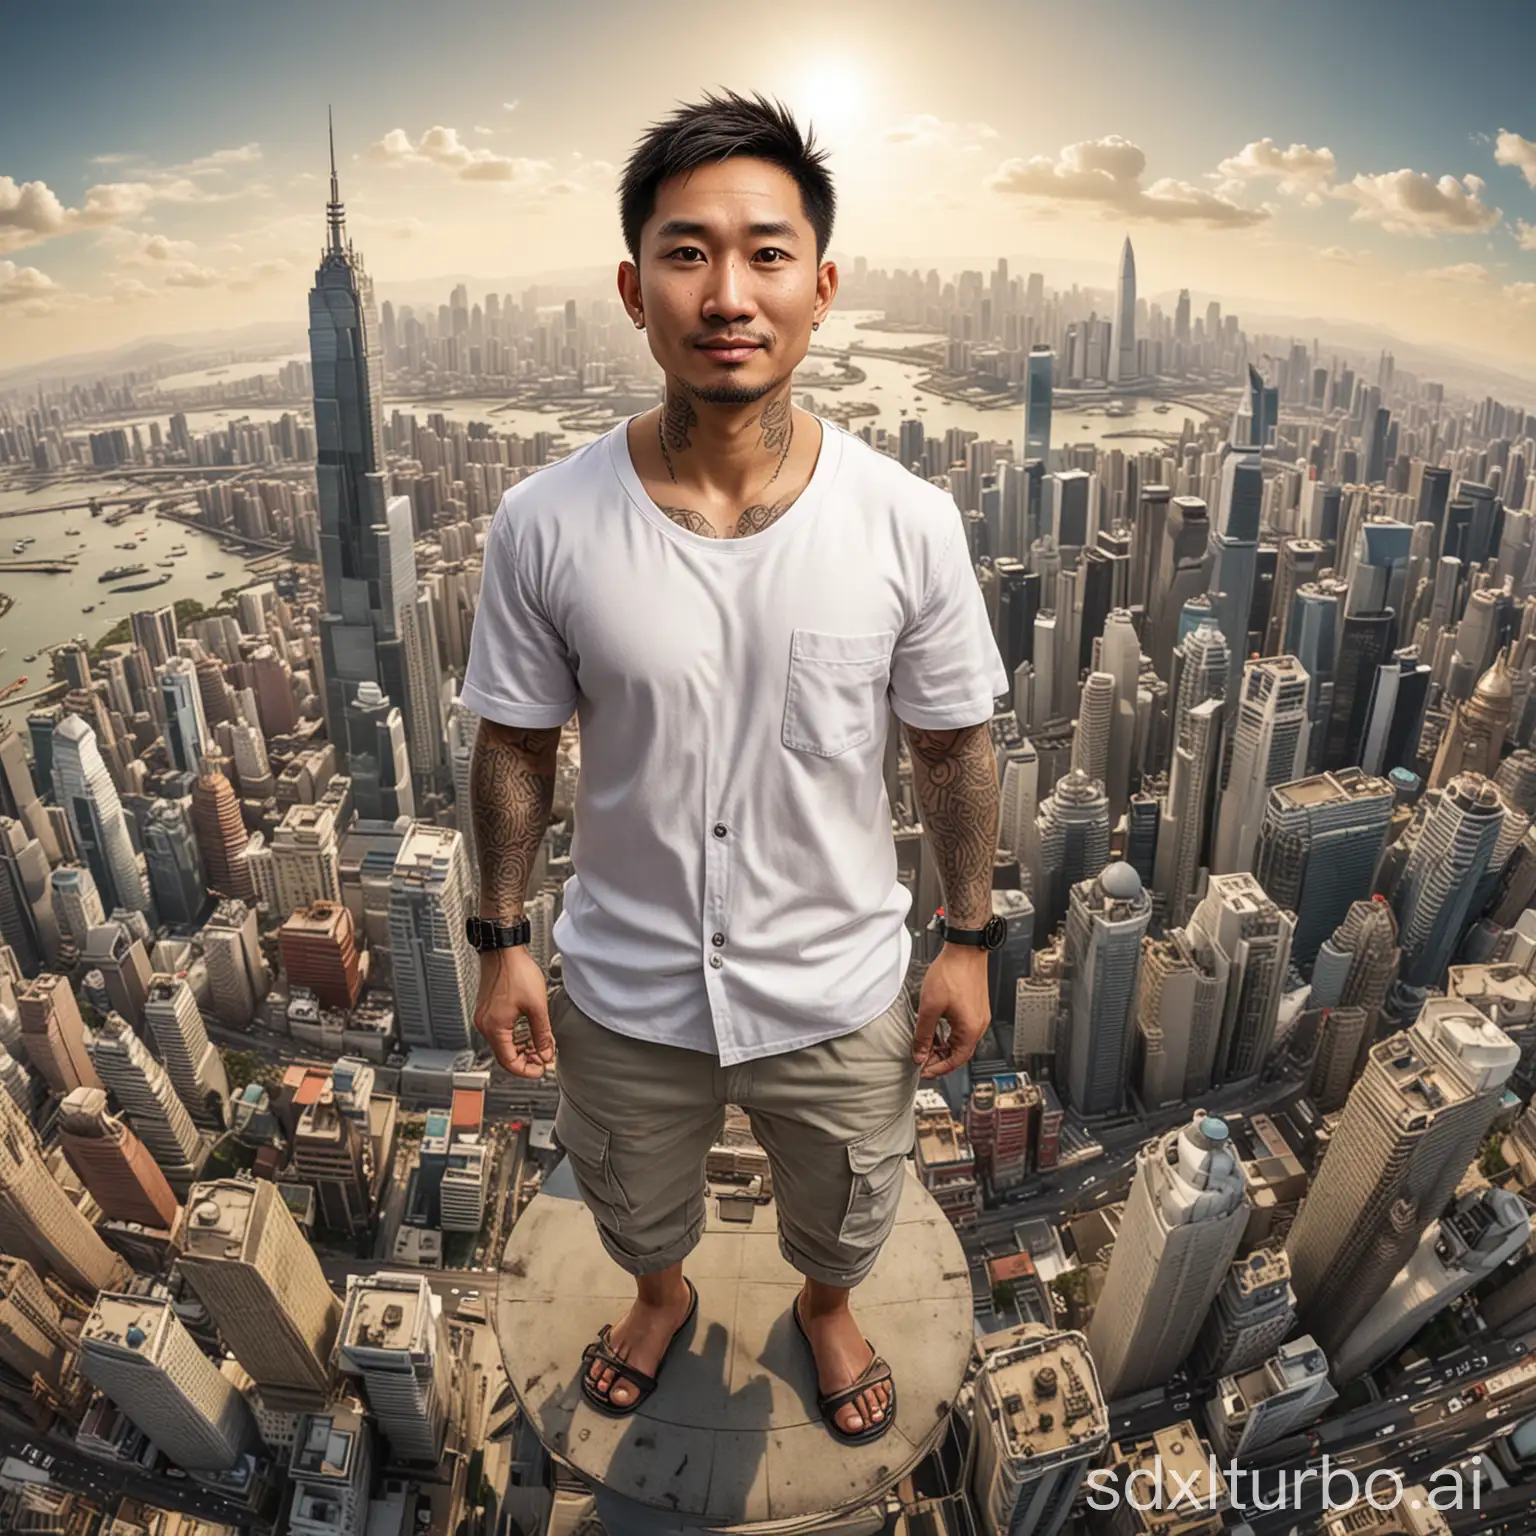 Hyperrealistic-4D-Caricature-Asian-Man-on-Tallest-Building-with-Cityscape-Background